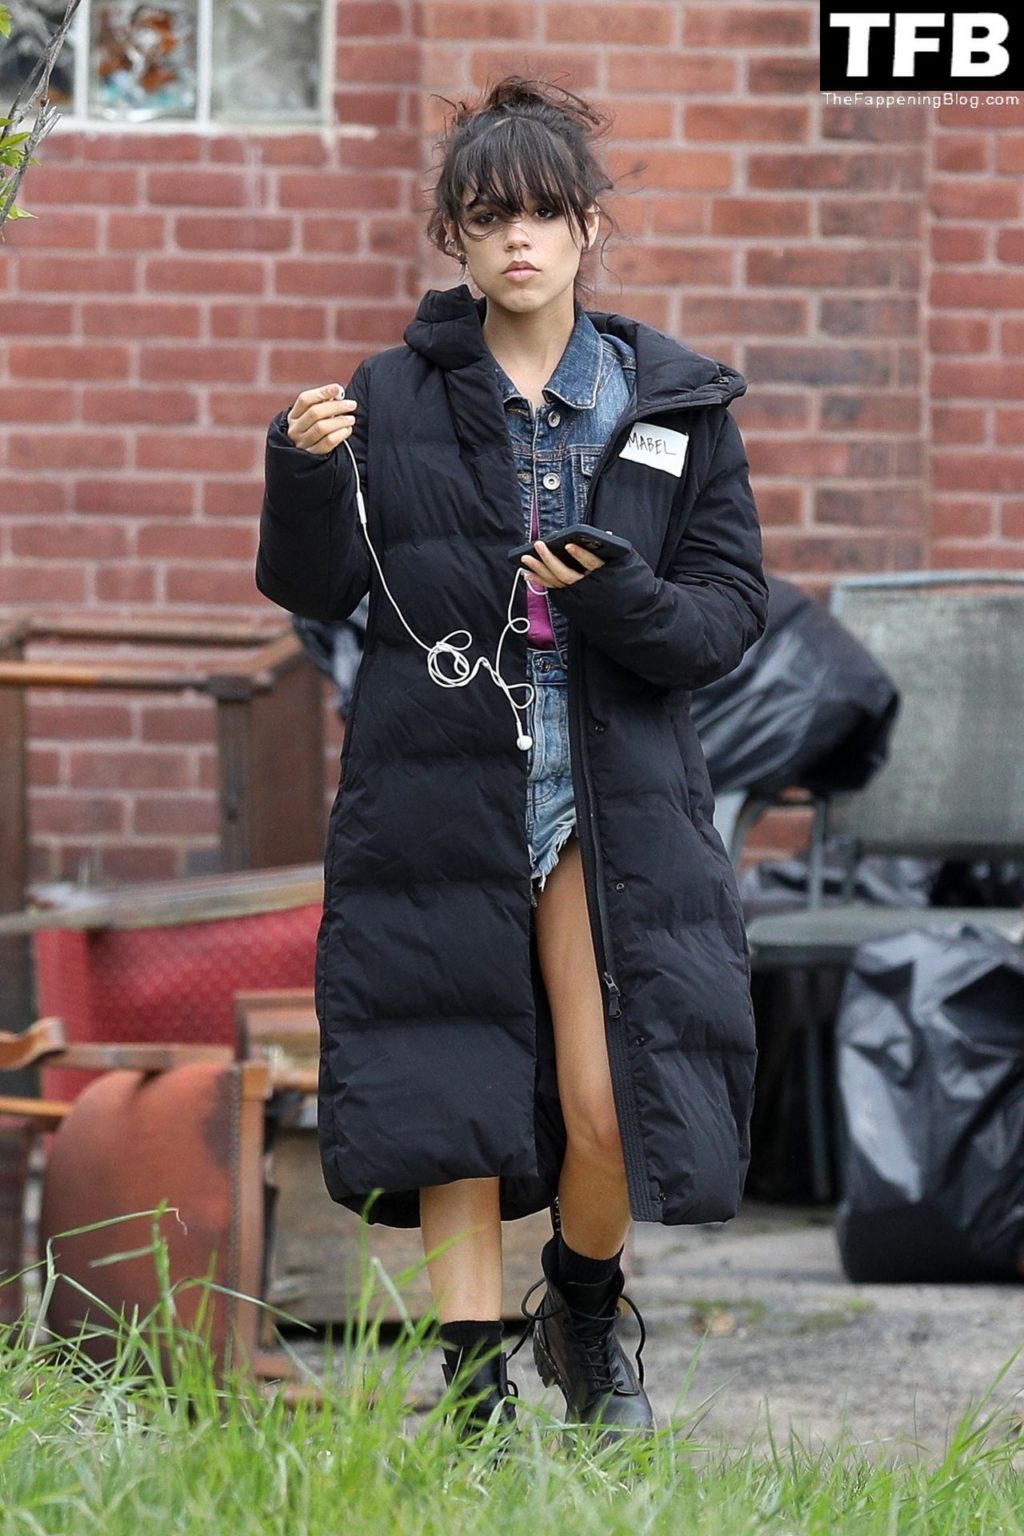 Jenna Ortega Sexy The Fappening Blog 21 1024x1536 - Leggy Jenna Ortega is Spotted in Short Shorts on the Set of “Finest Kind” (24 Photos)